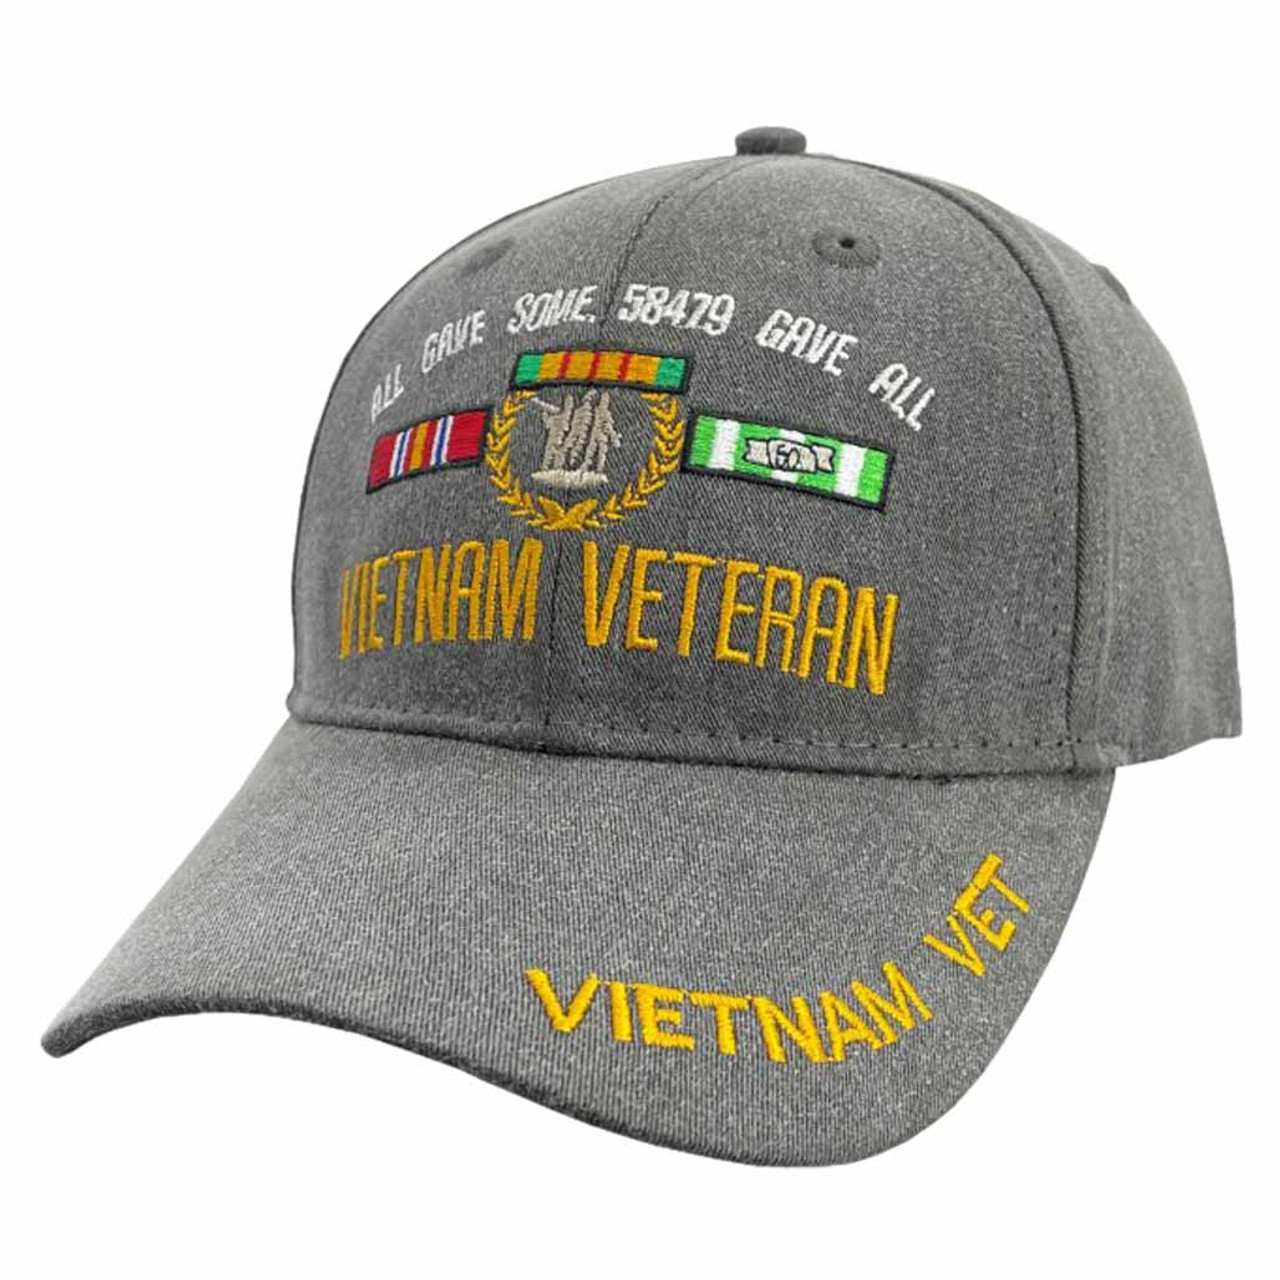 Vietnam Veteran All Gave Some 58479 Gave All Hat - Charcoal Gray: front view